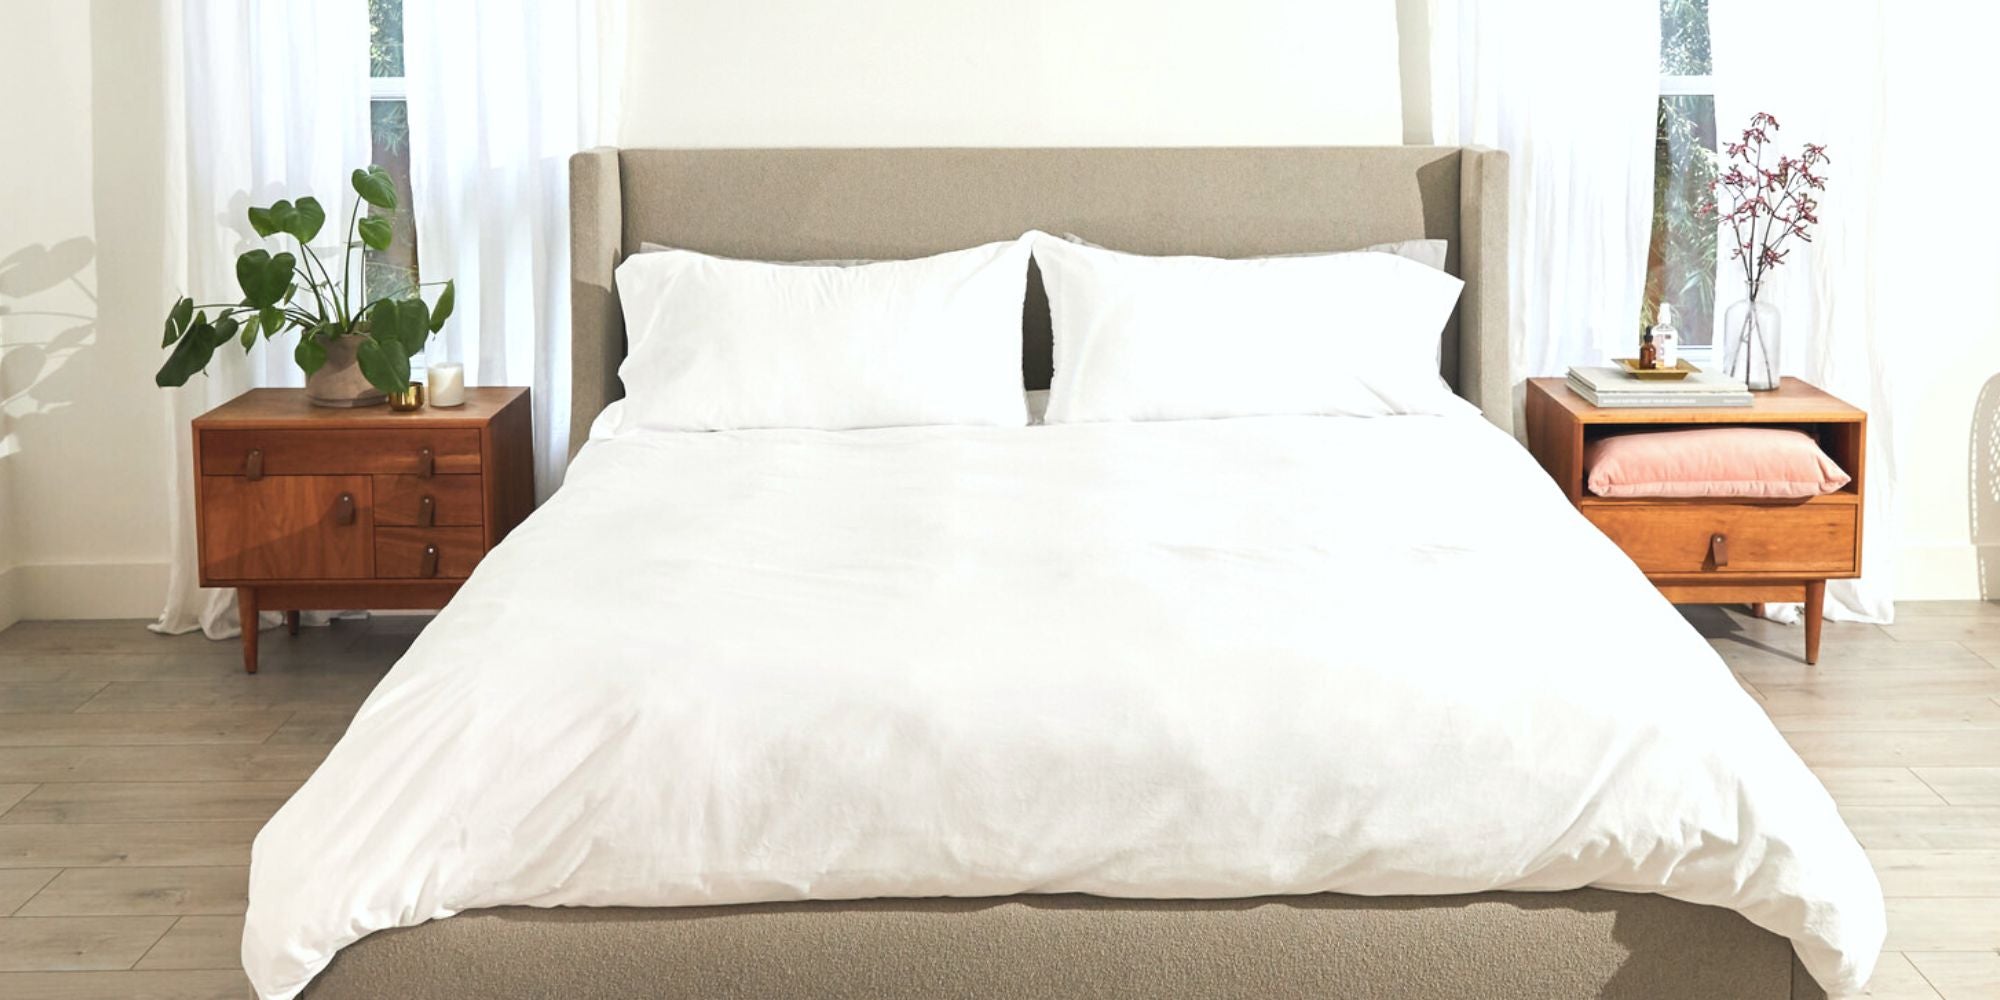 white bed sheets and duvet covers on a nice bed